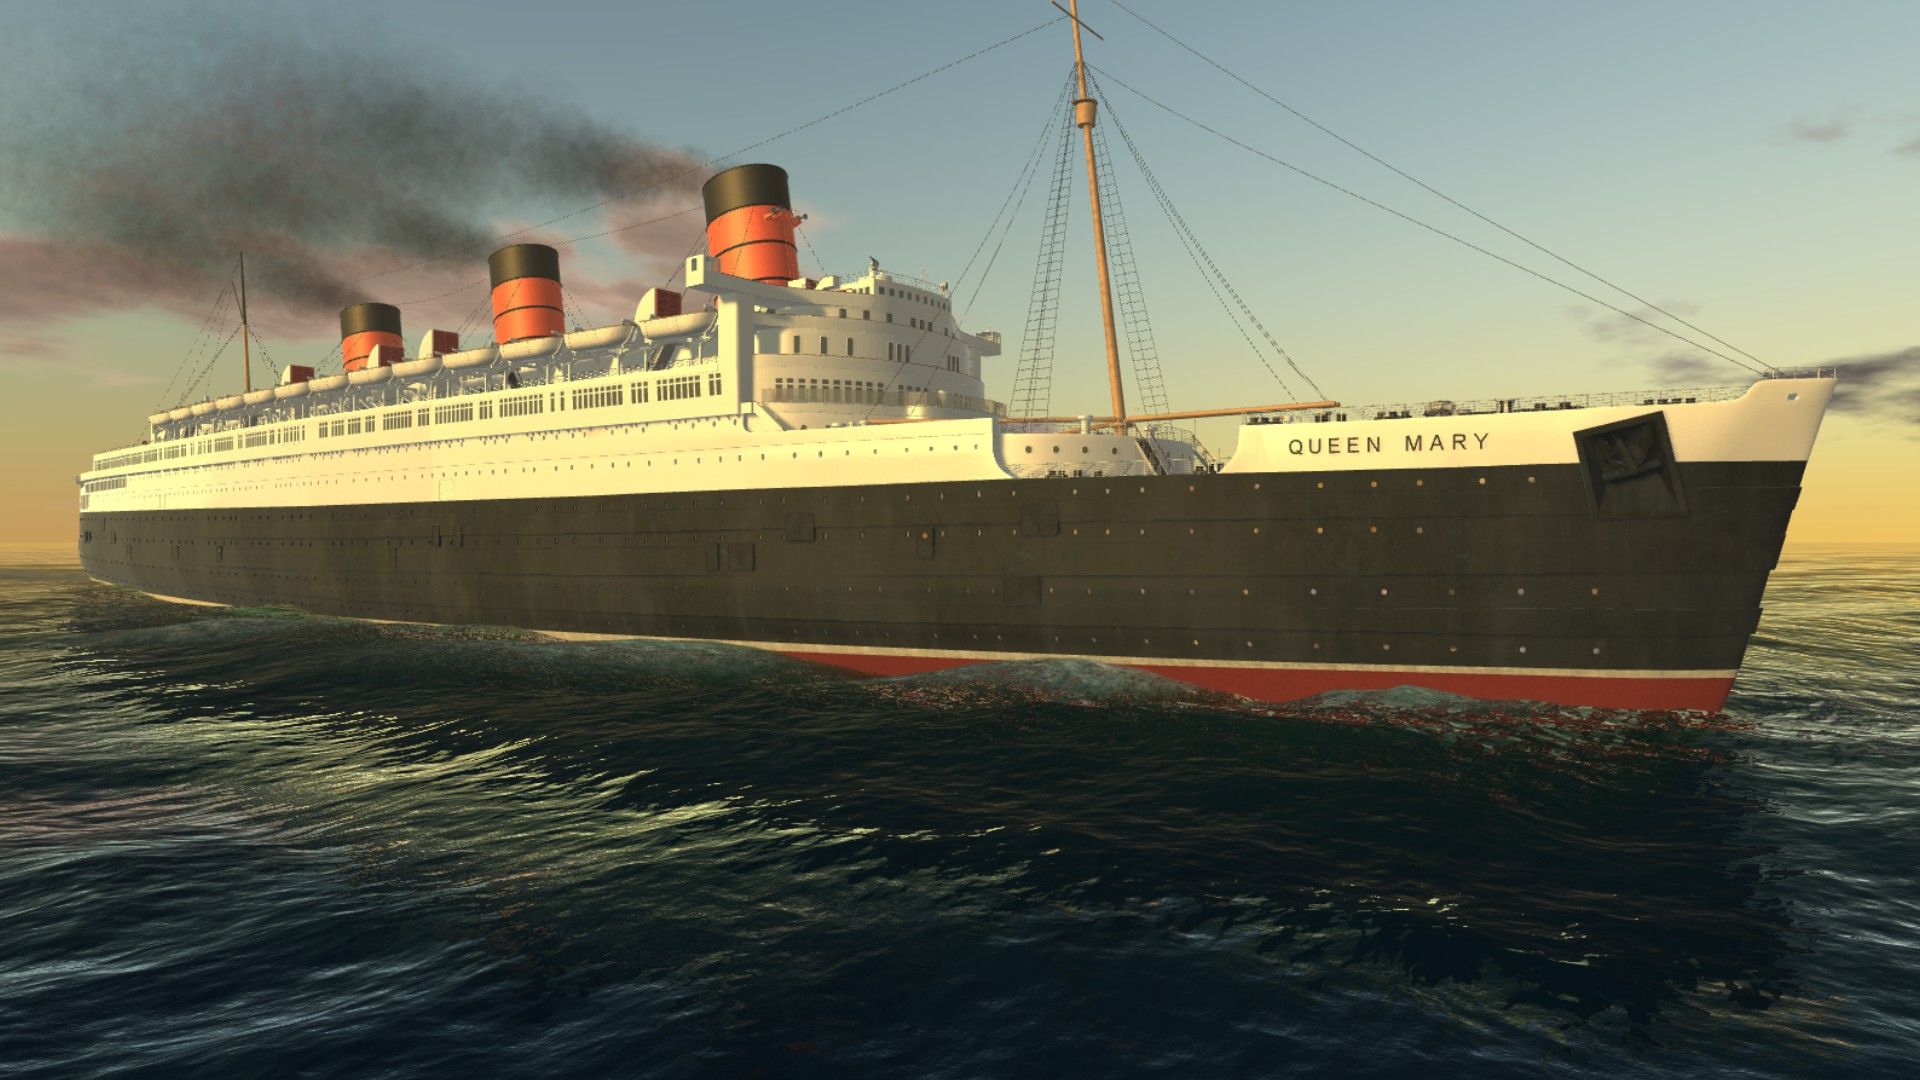 Steam Community - Screenshot - My favorite ship since childhood, the RMS Queen Mary!